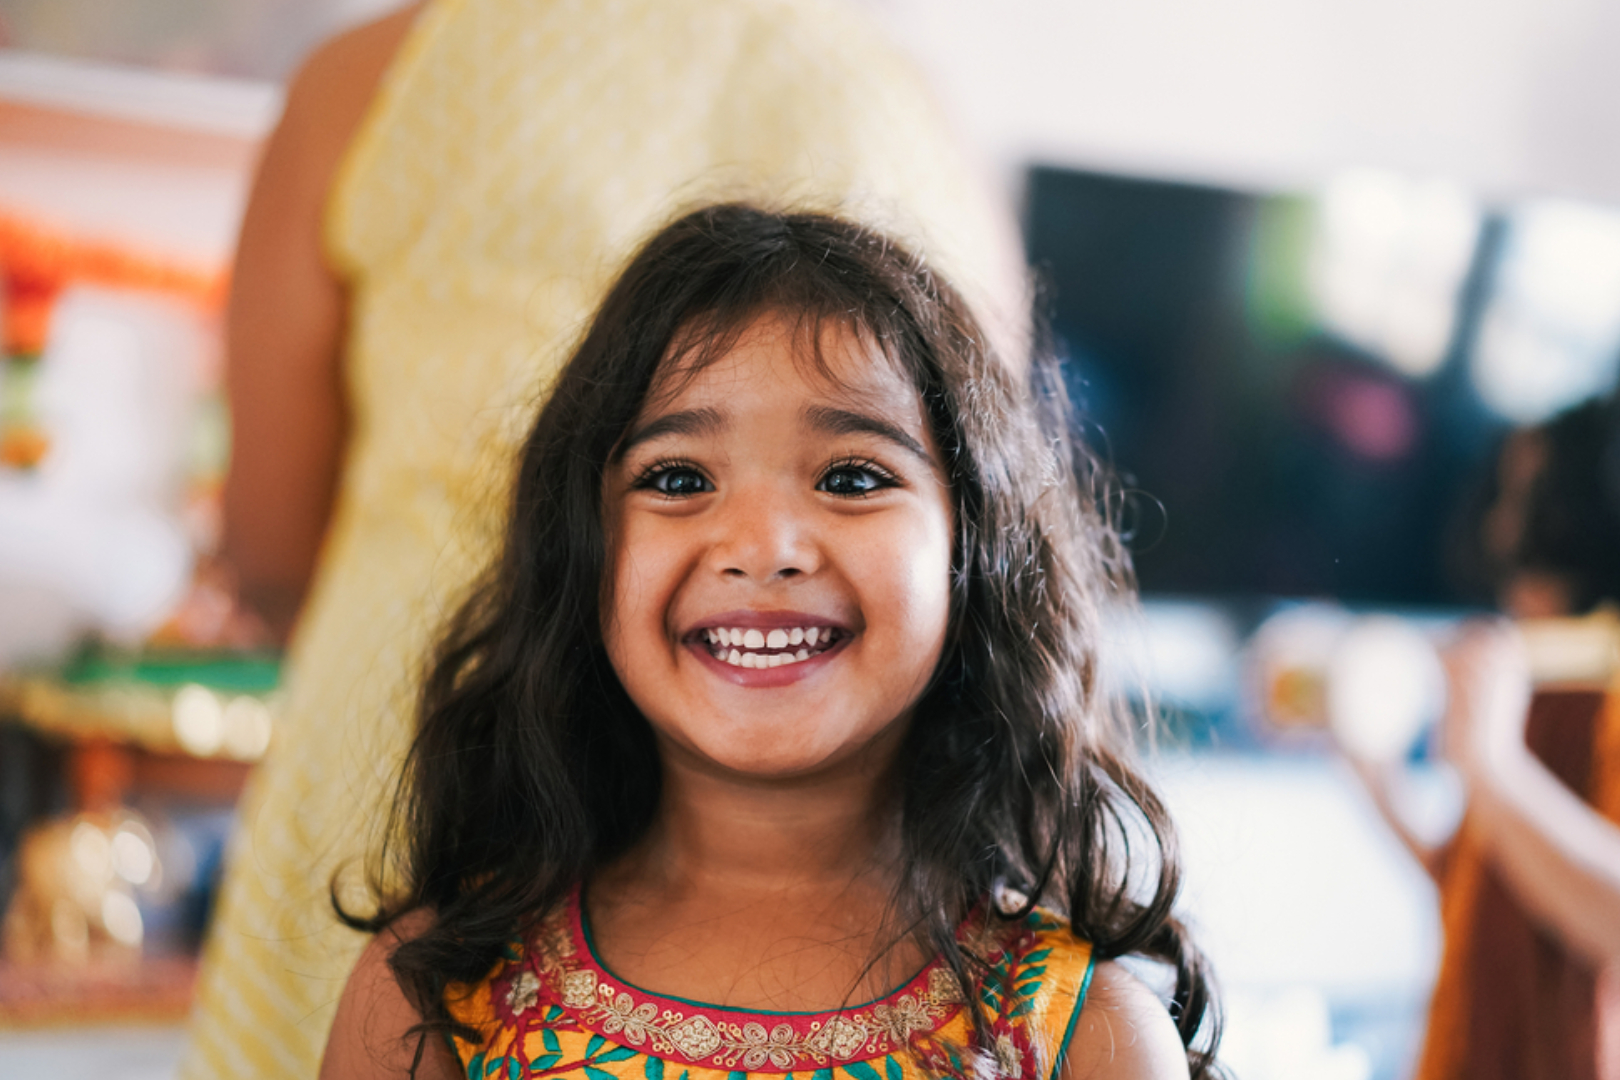 A young girl smiles widely at the camera